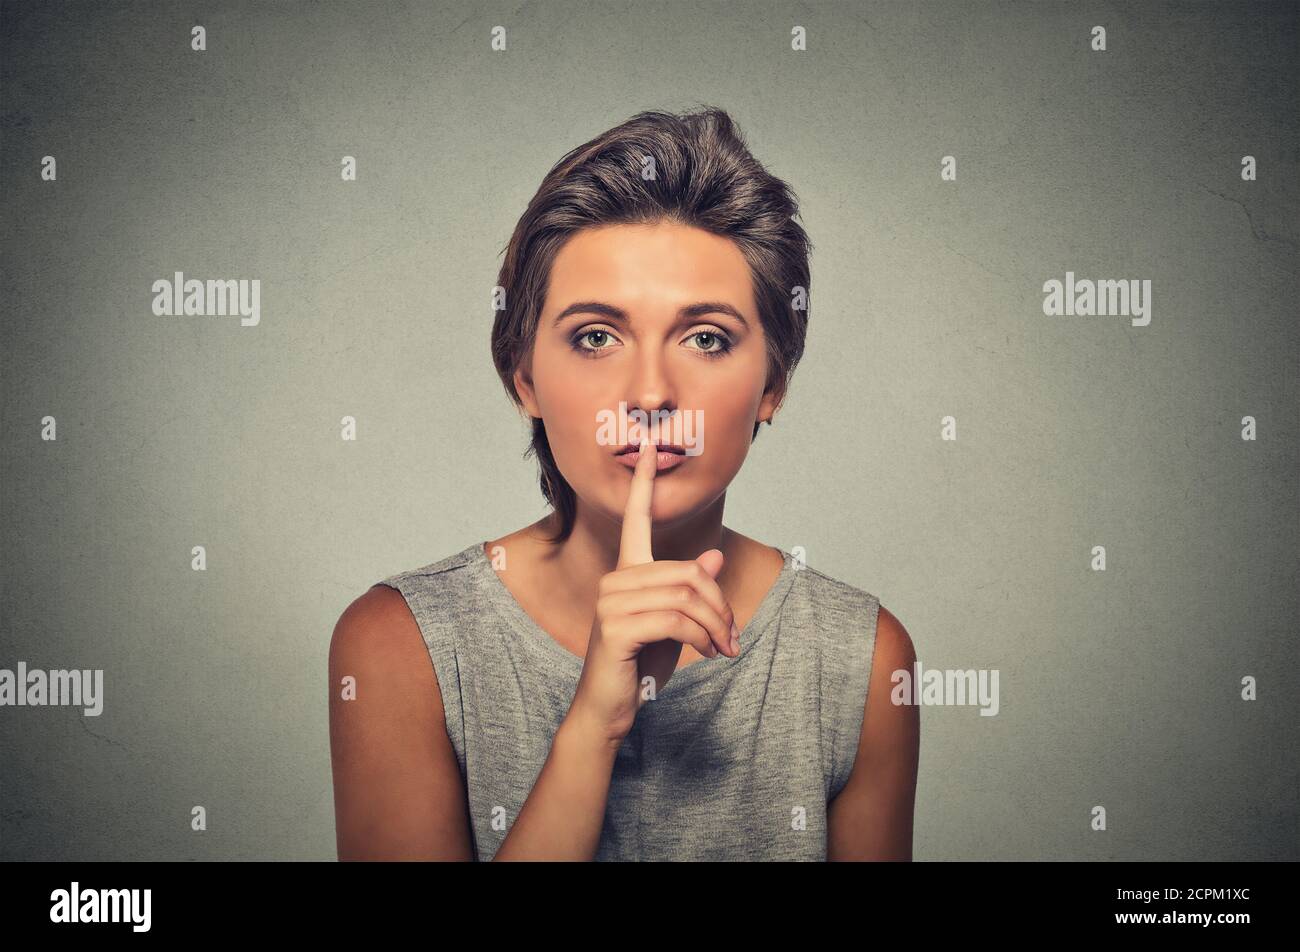 Closeup portrait of secret woman. Young female showing hand silence sign, asking someone to keep it quiet, isolated on gray background. Human communic Stock Photo